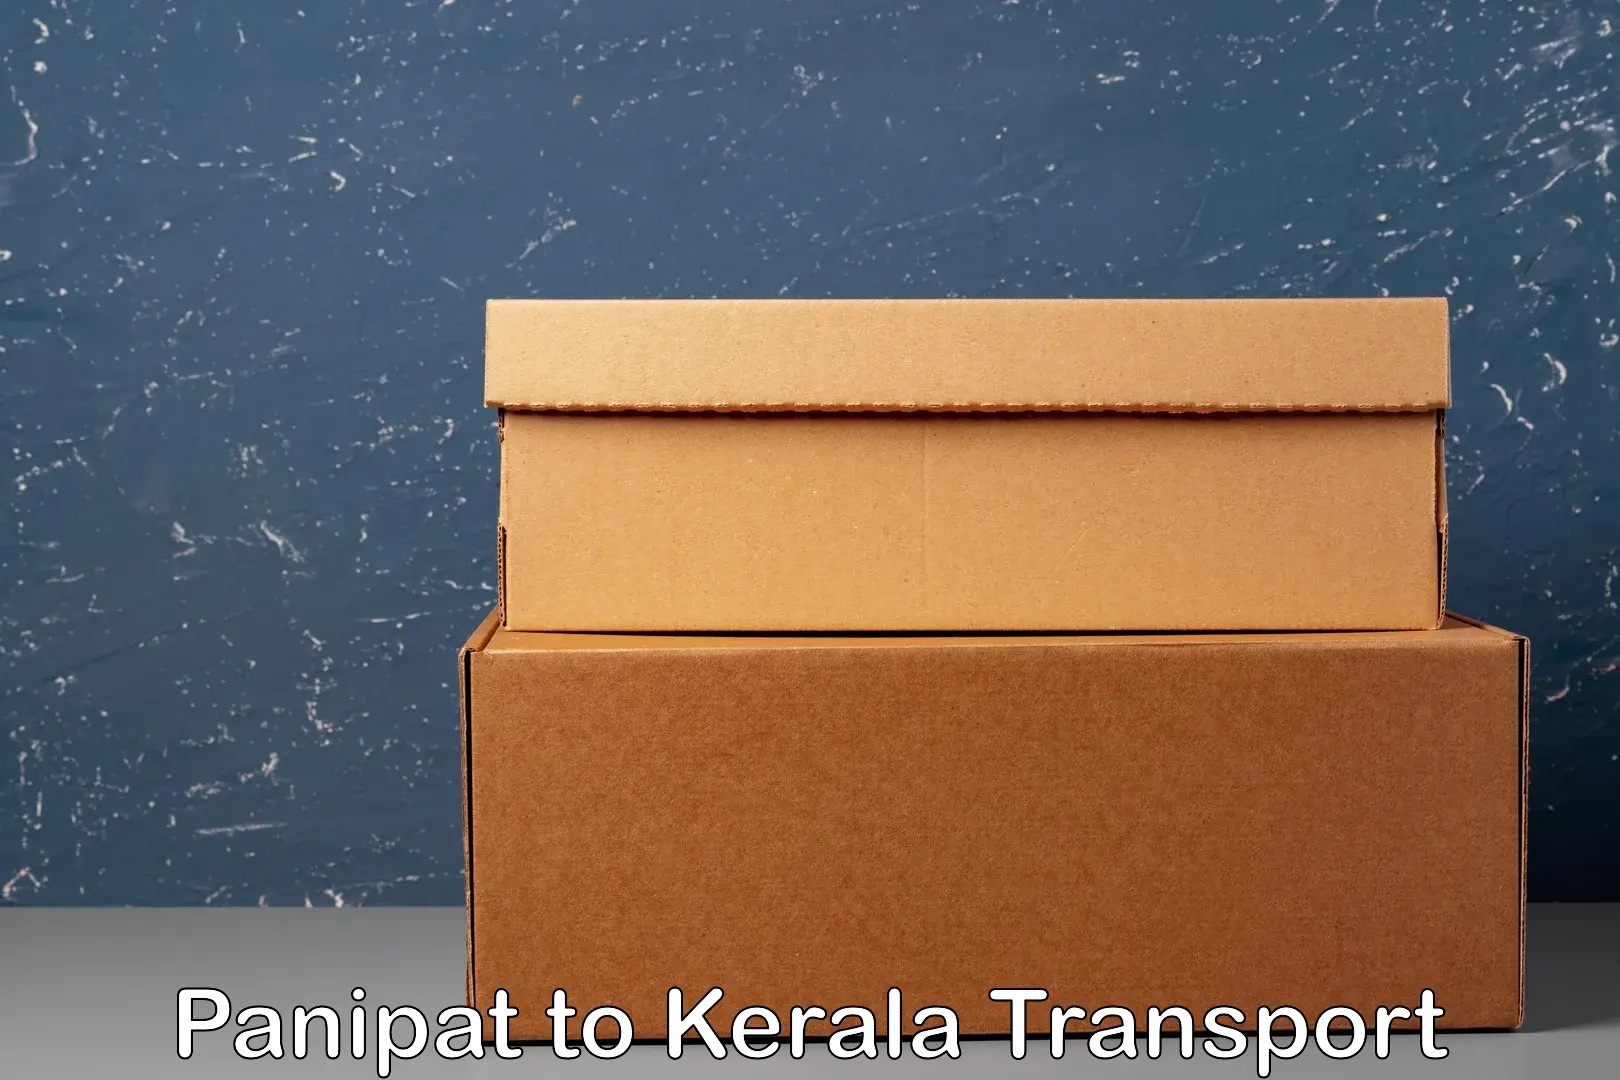 Delivery service Panipat to Kottayam